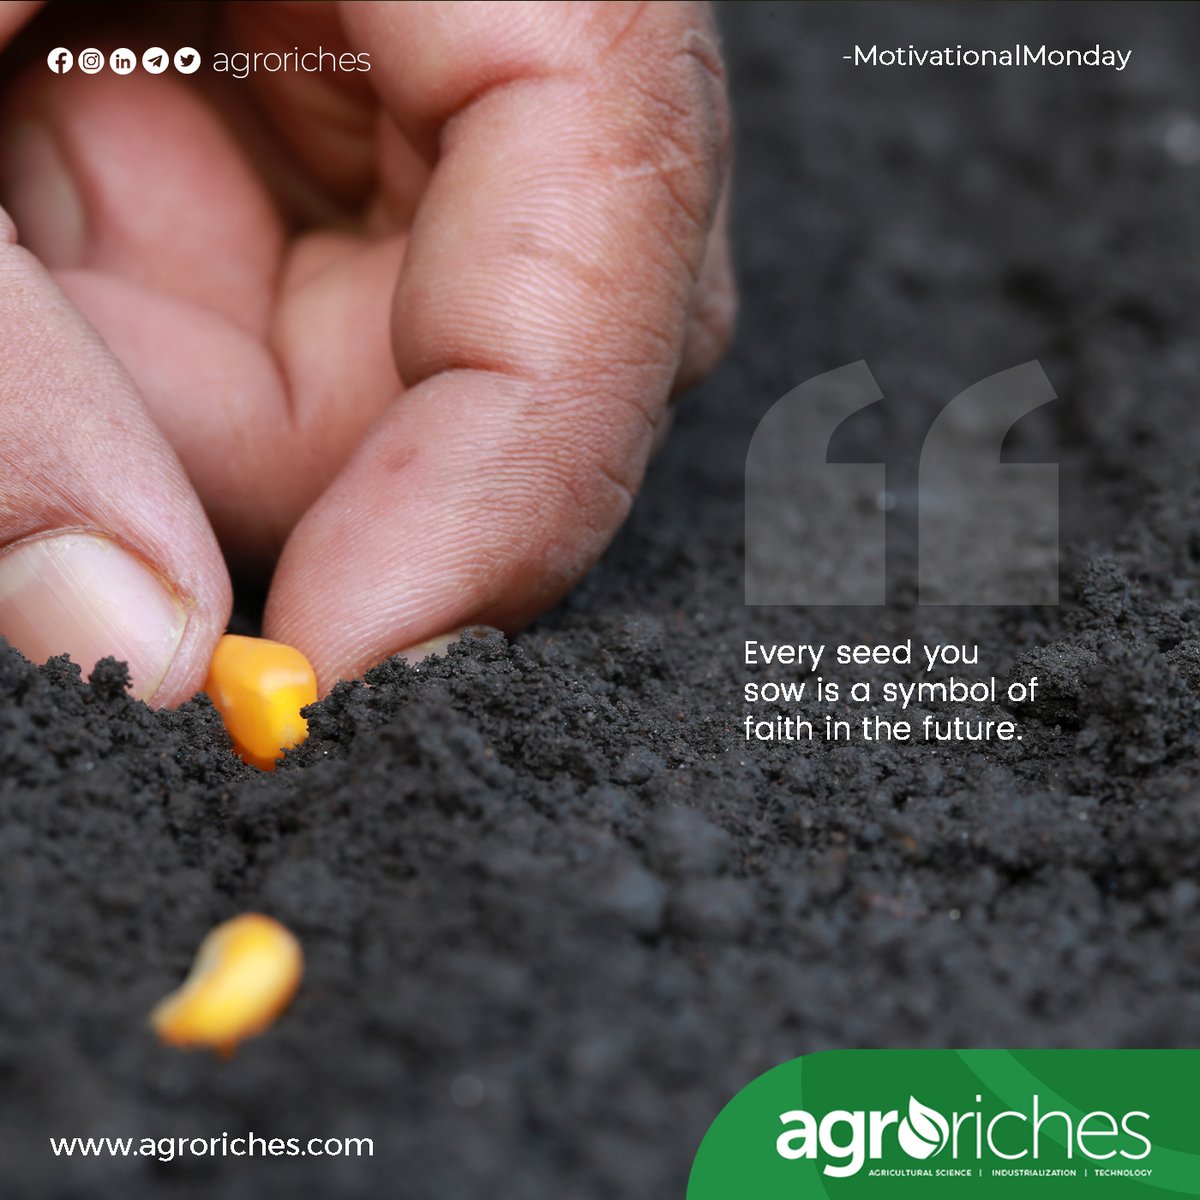 Seeds are the foundation of agriculture and play a crucial role in the success of farmers.

#expertise #motivationalmonday #monday #newweek #freshstart #agriculture #farm #startup #agroriches #inspiration #success #neverstoplearning #expertinprogress #motivation